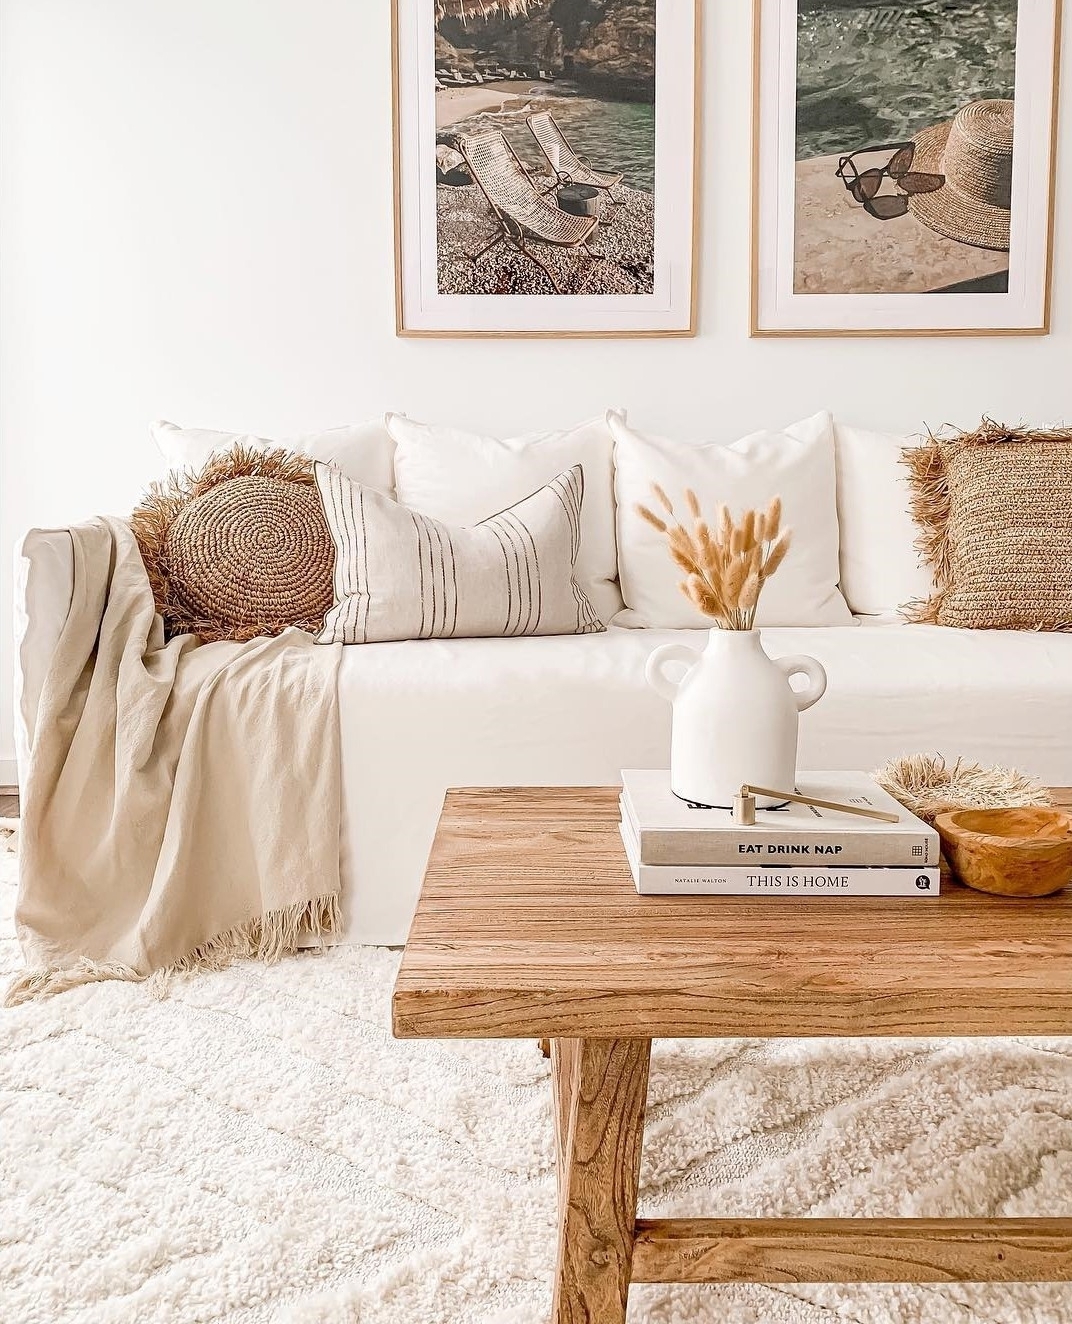 The Art of Layering: Enhancing Your Winter Decor with Warm Textiles